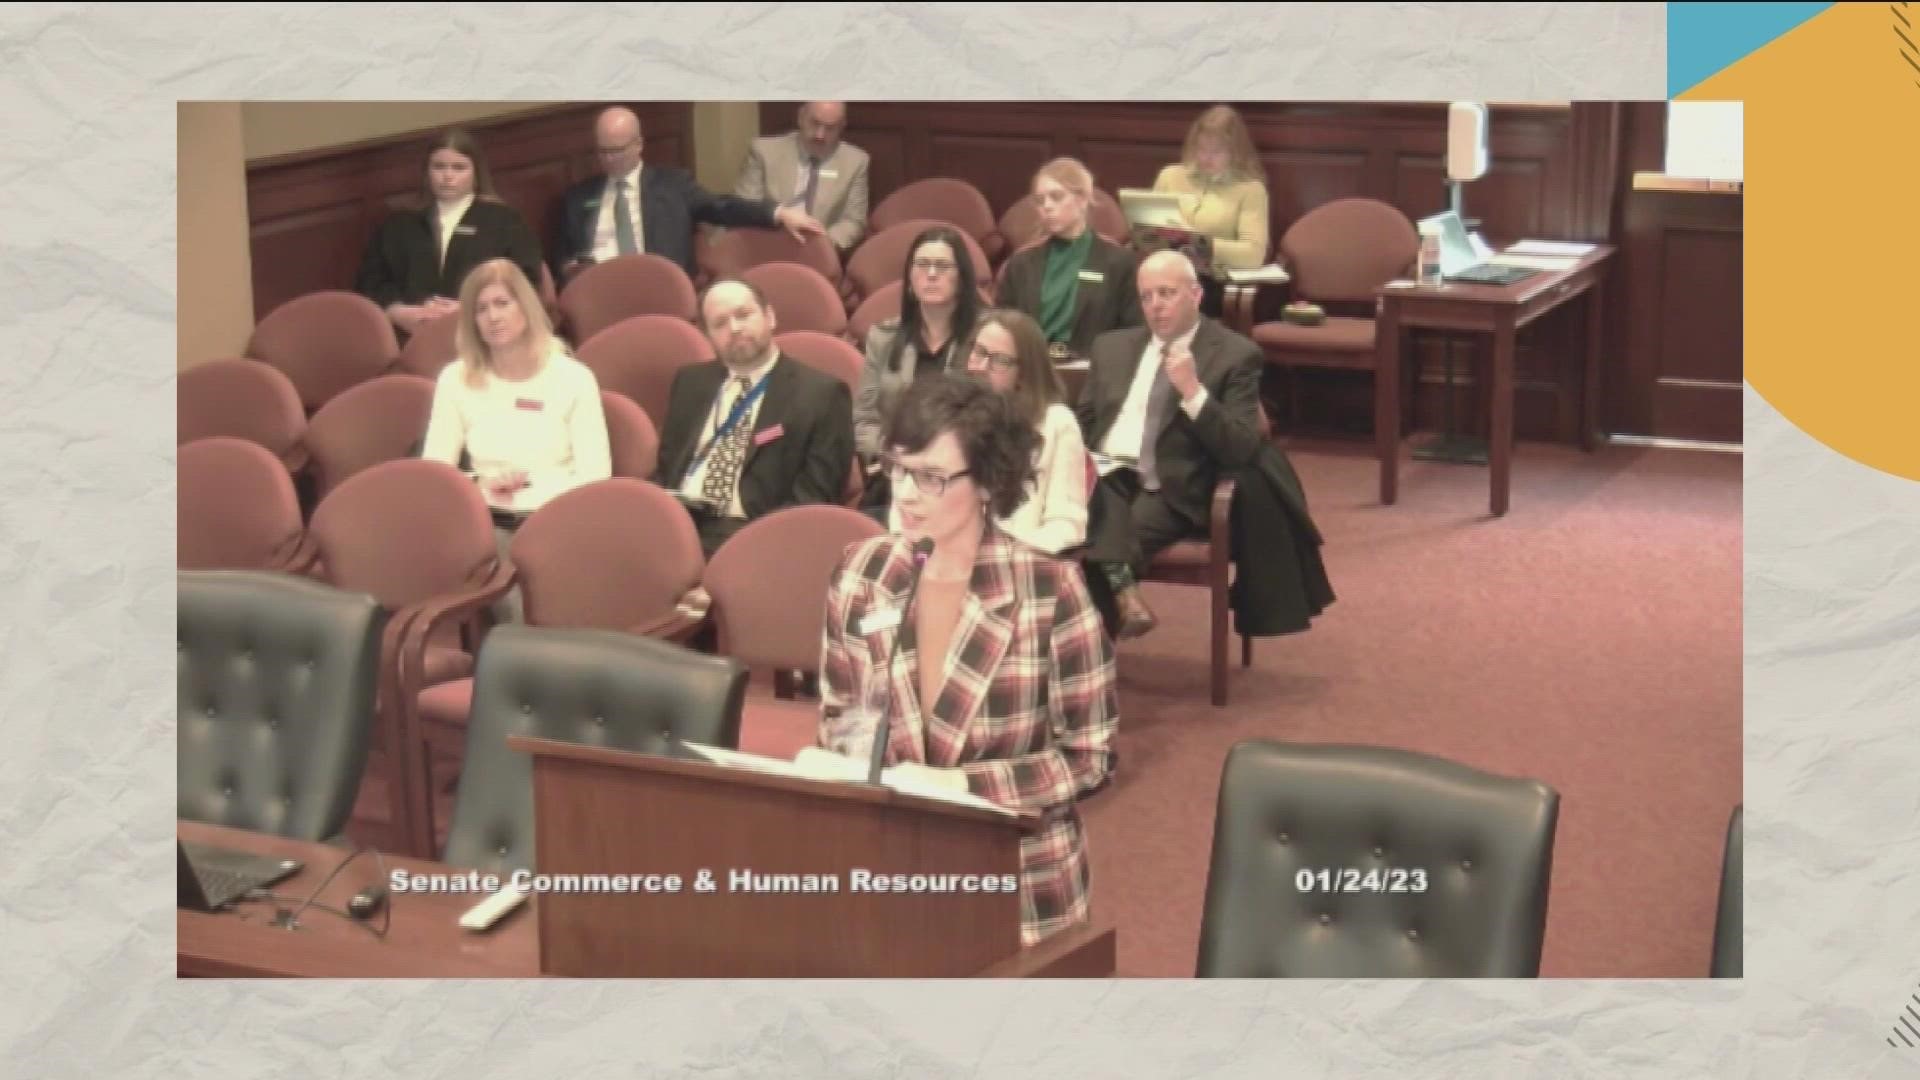 Senator Tammy Nichols, R-Middleton, said in committee vaccines are being introduced into food for human consumption.